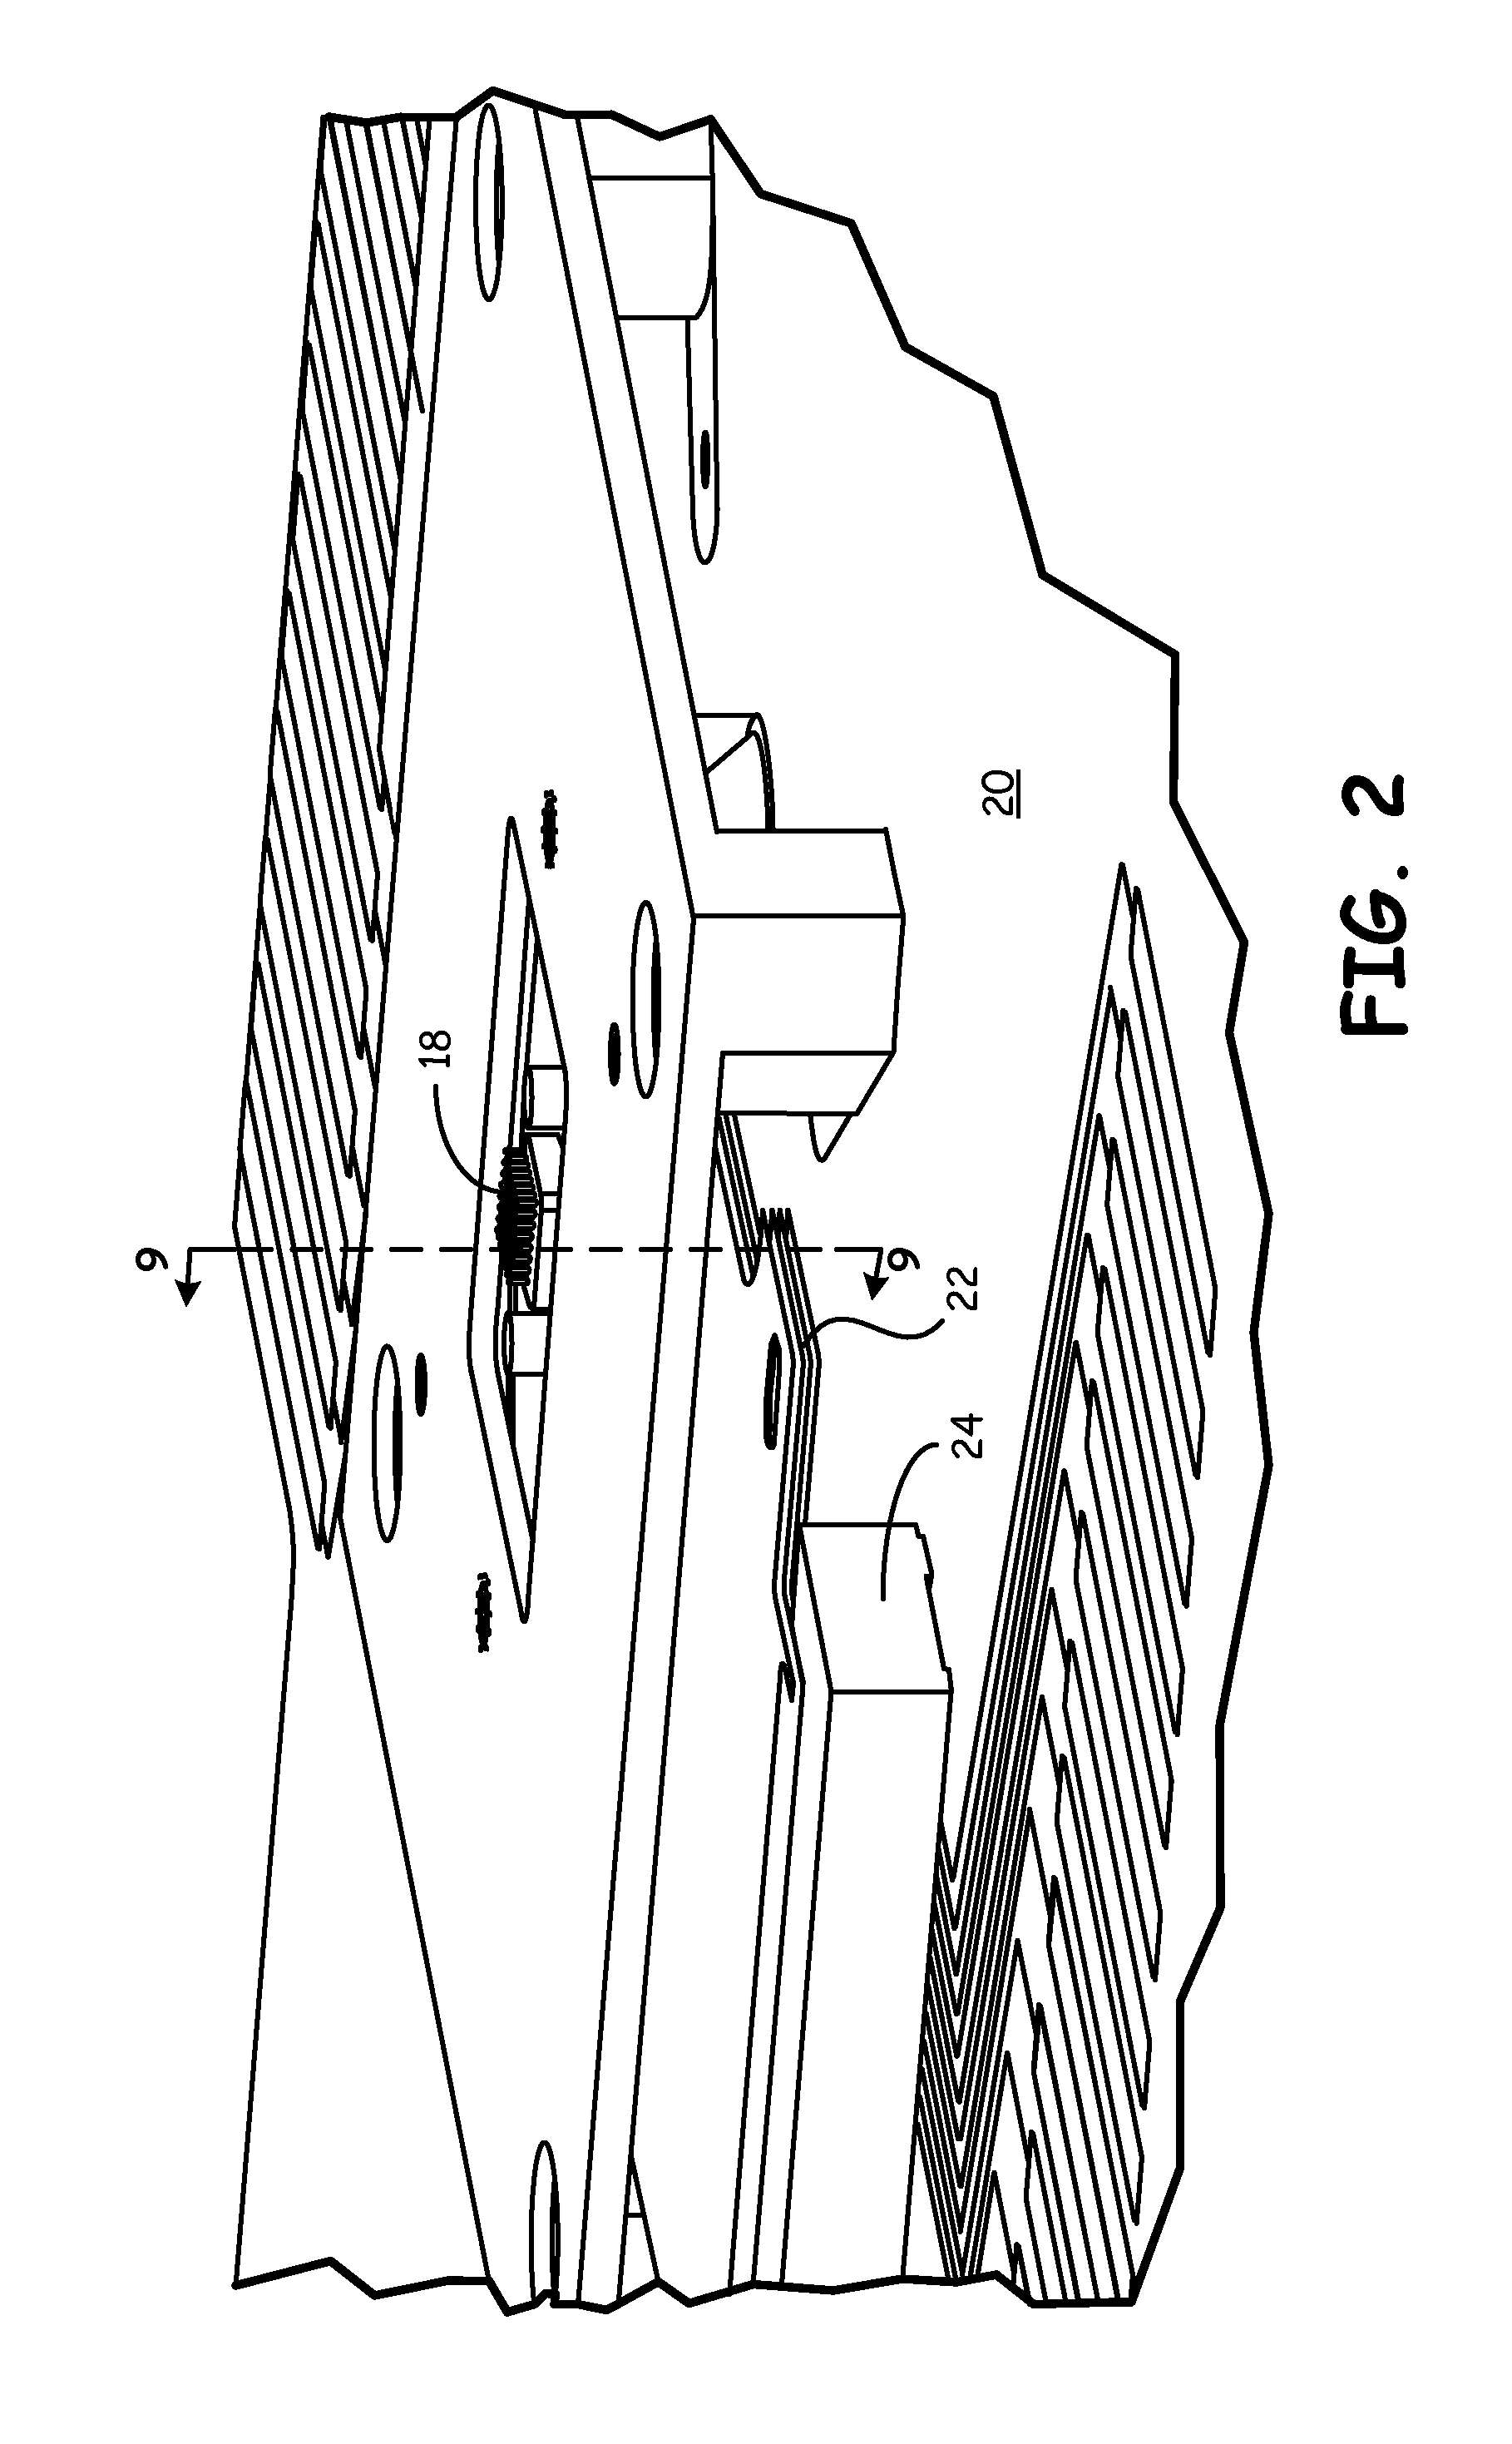 Testing apparatus and method for microcircuit and wafer level IC testing